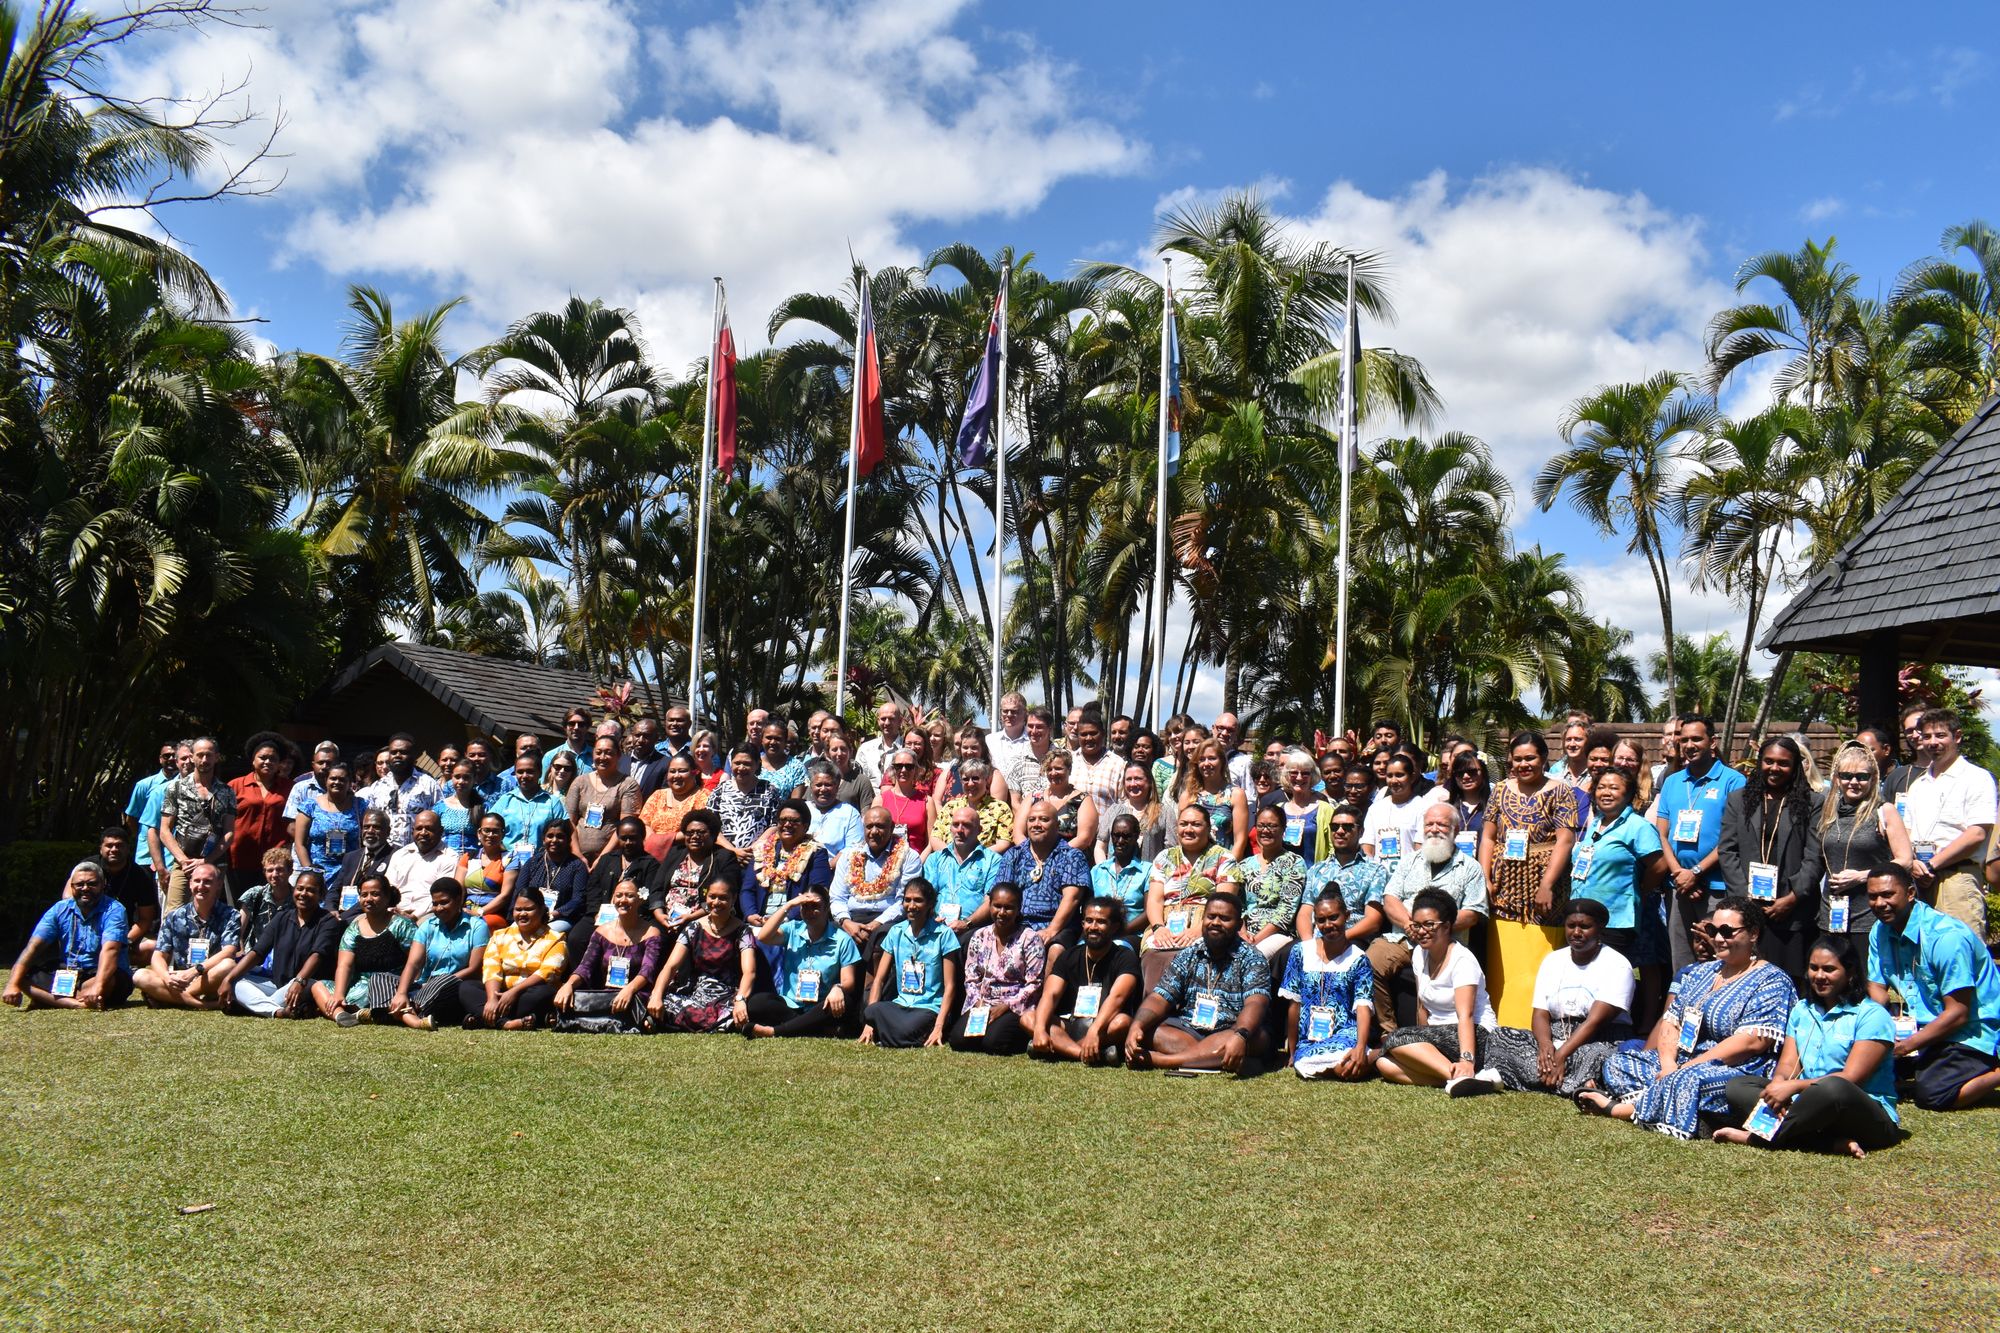 1st Pacific Islands Conference on Ocean Science and Ocean Management